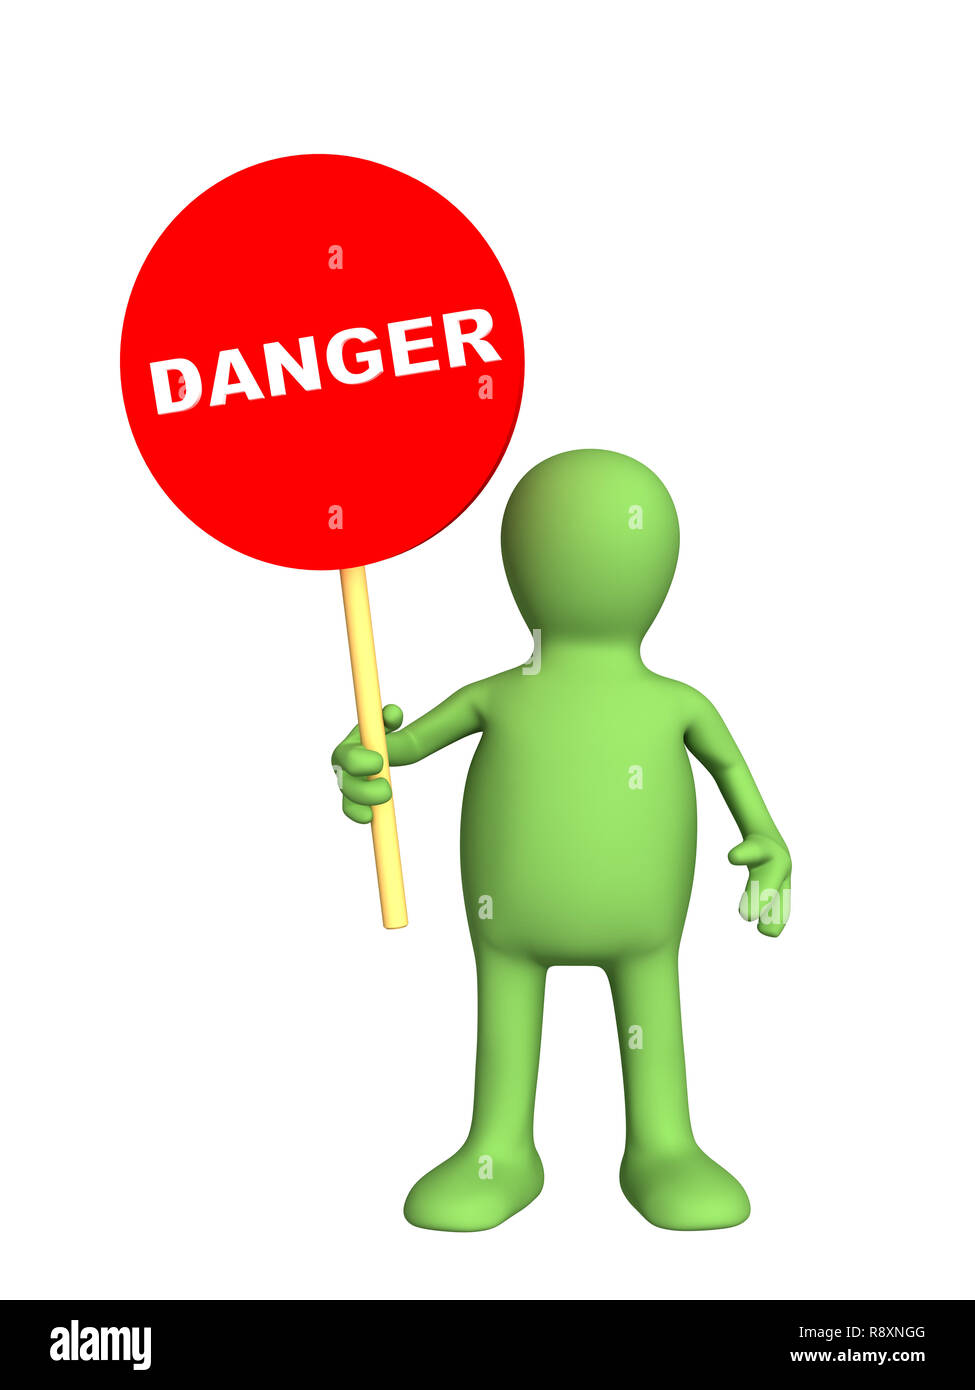 3D Human In Warning Pose Don T Do It Stock Photo, Picture and Royalty Free  Image. Image 18849663.